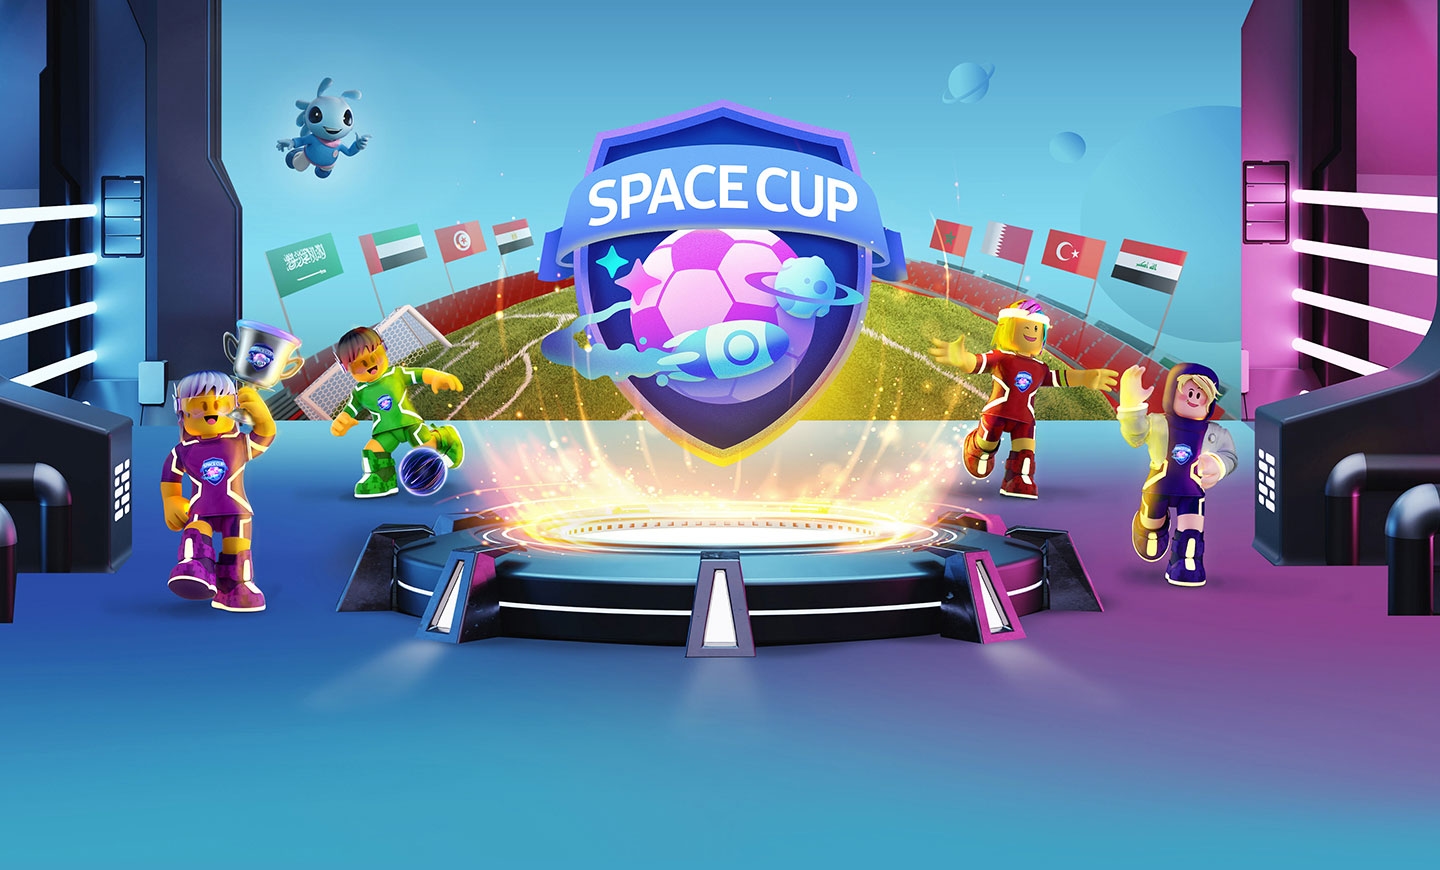 SPACE CUP